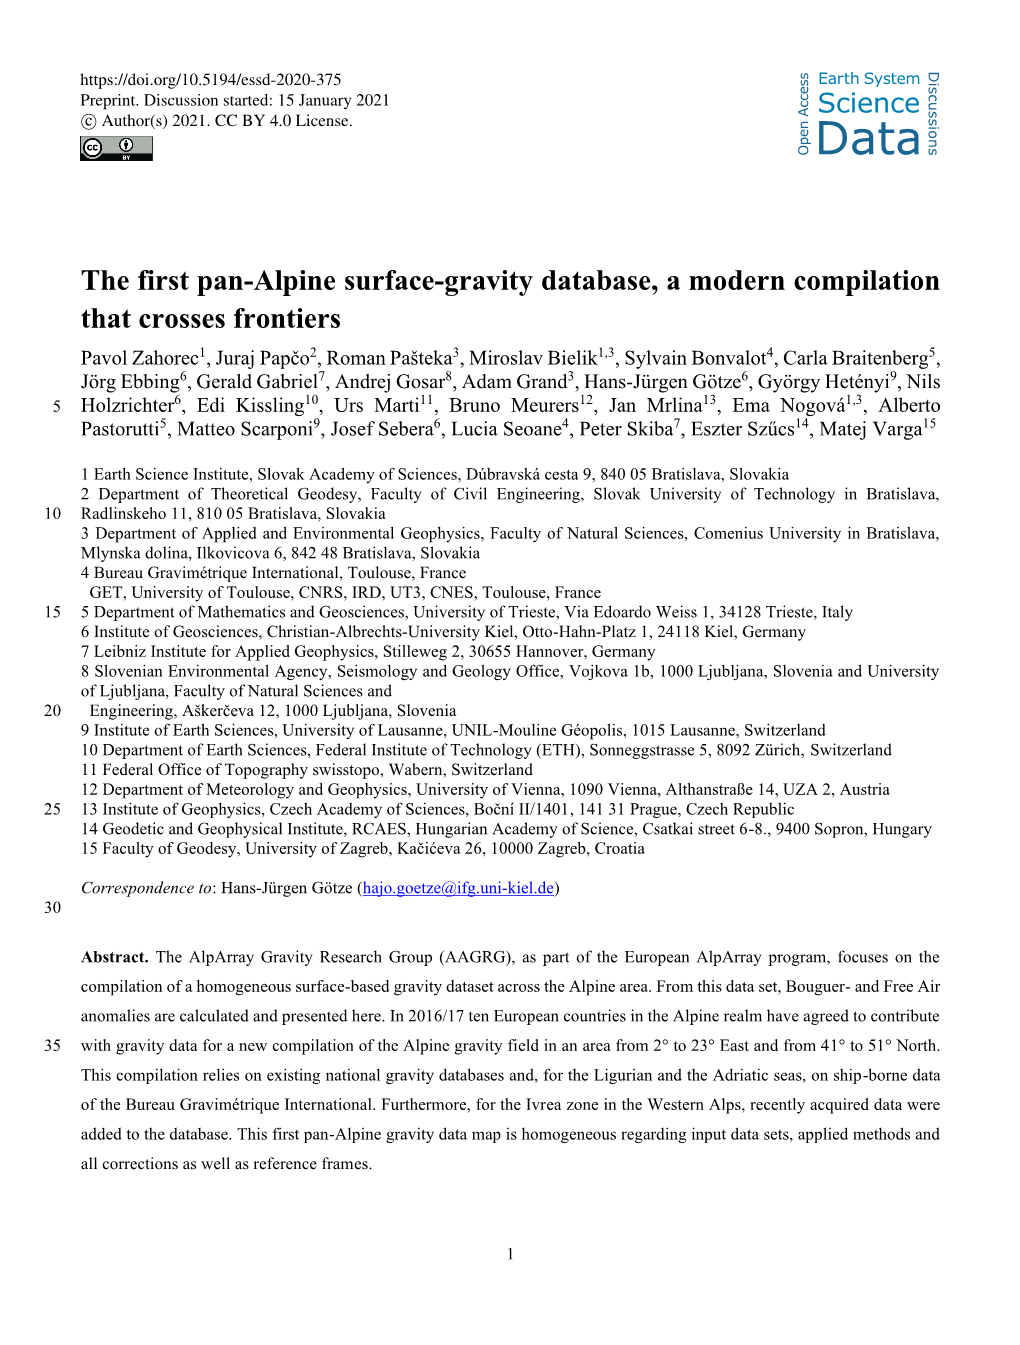 The First Pan-Alpine Surface-Gravity Database, a Modern Compilation